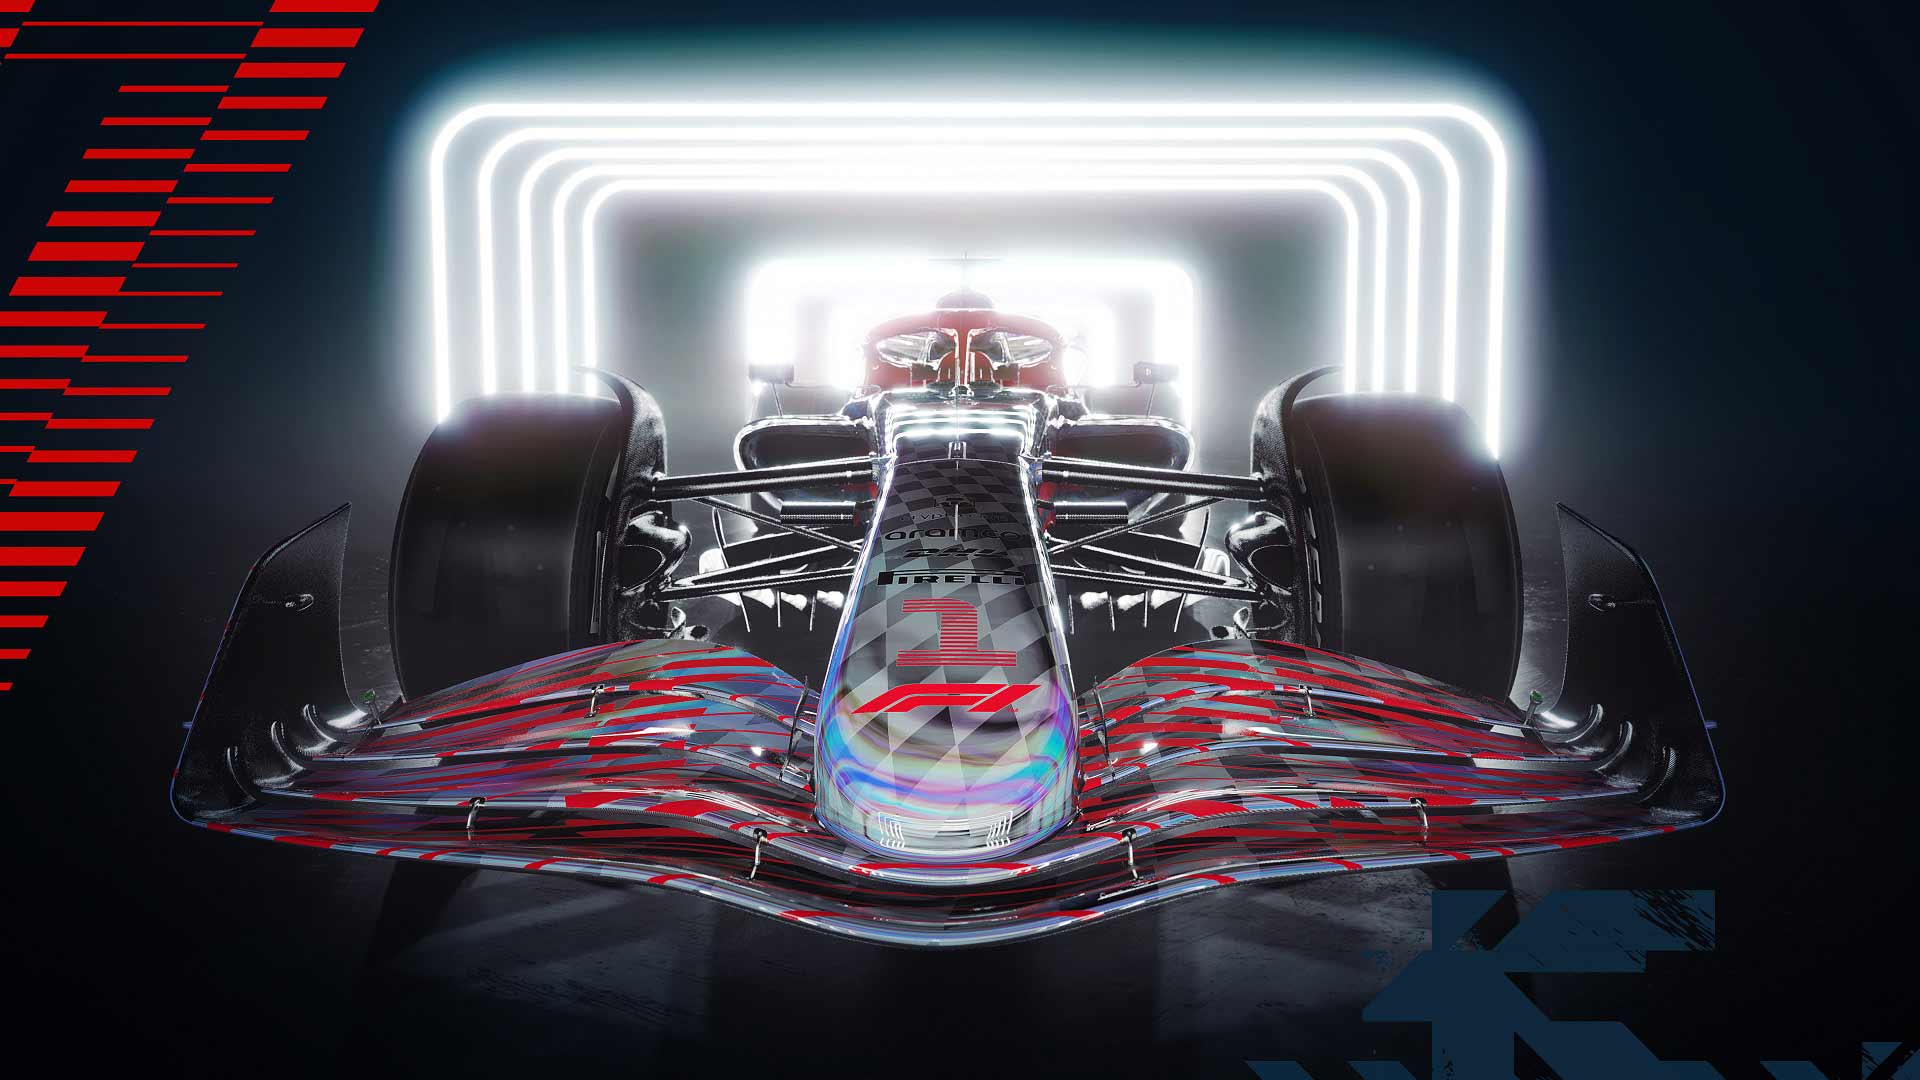 Here's How 'F1 22' Racing Looks in VR, Coming in July